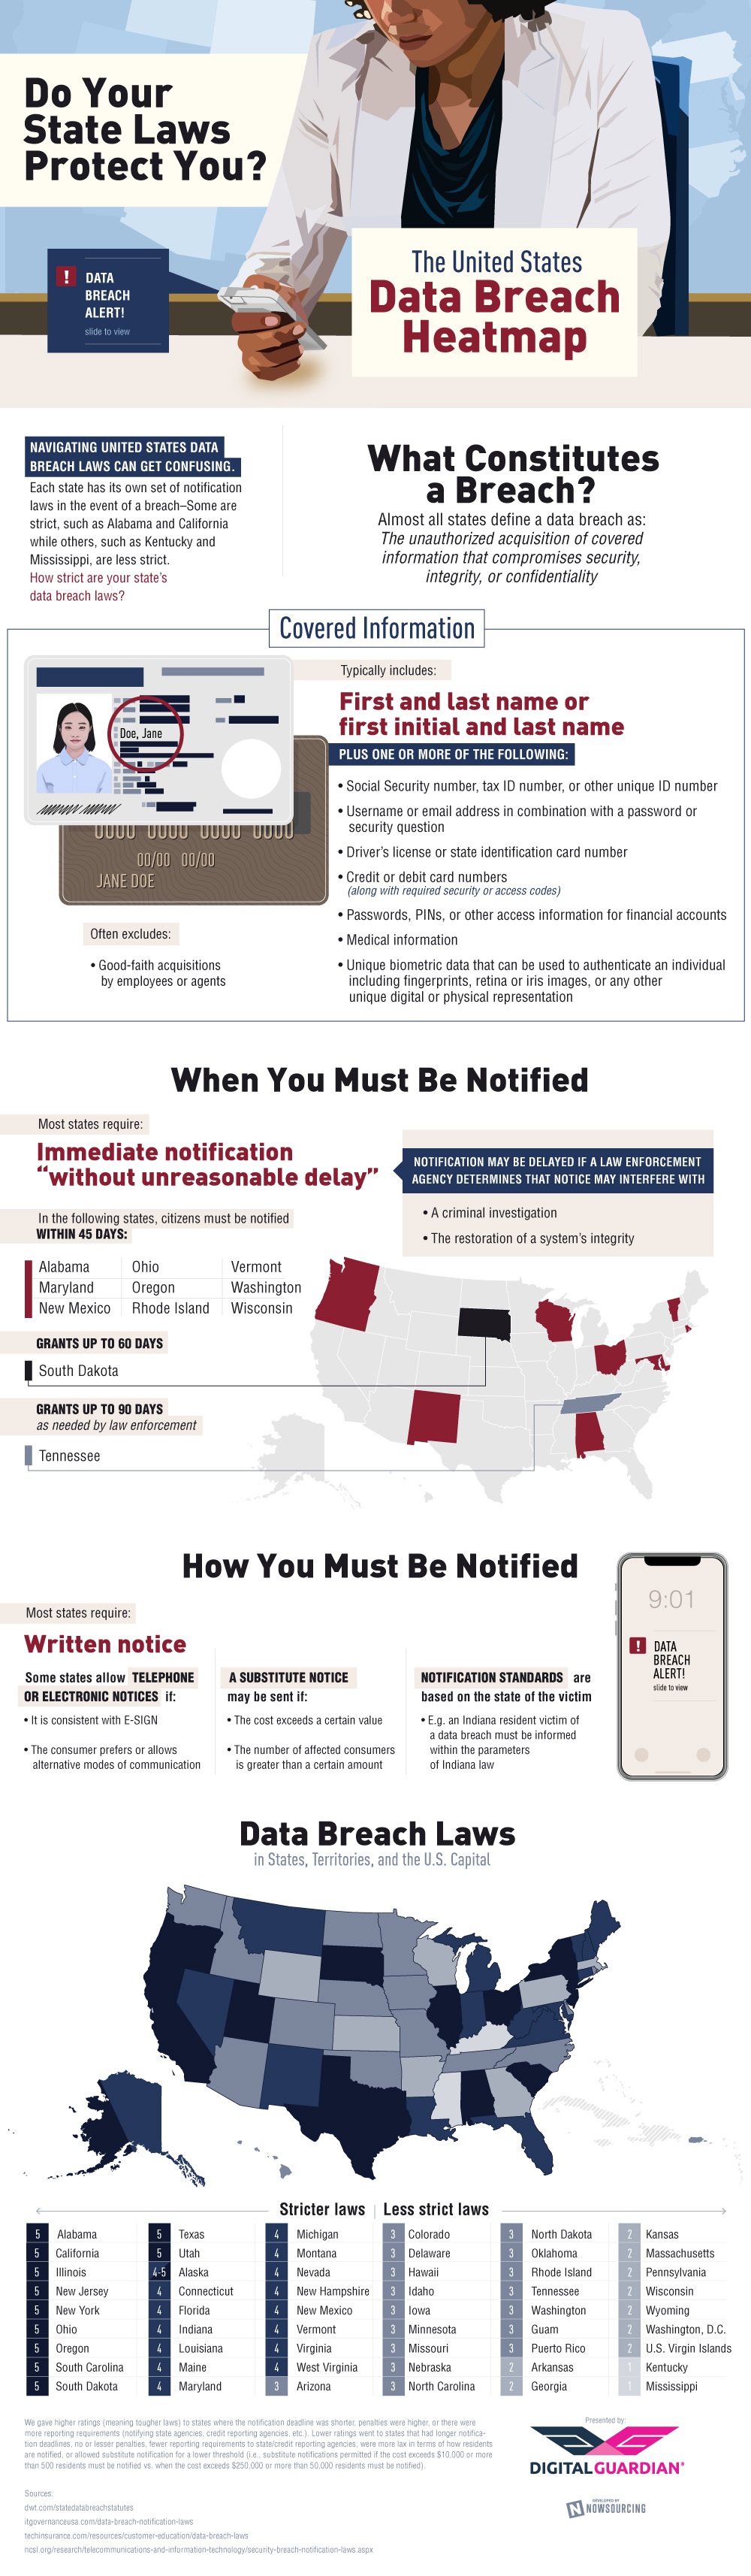 State Cybersecurity Laws: If You Suffer a Cyber Attack, Does Your State Have Your Back? (INFOGRAPHIC)